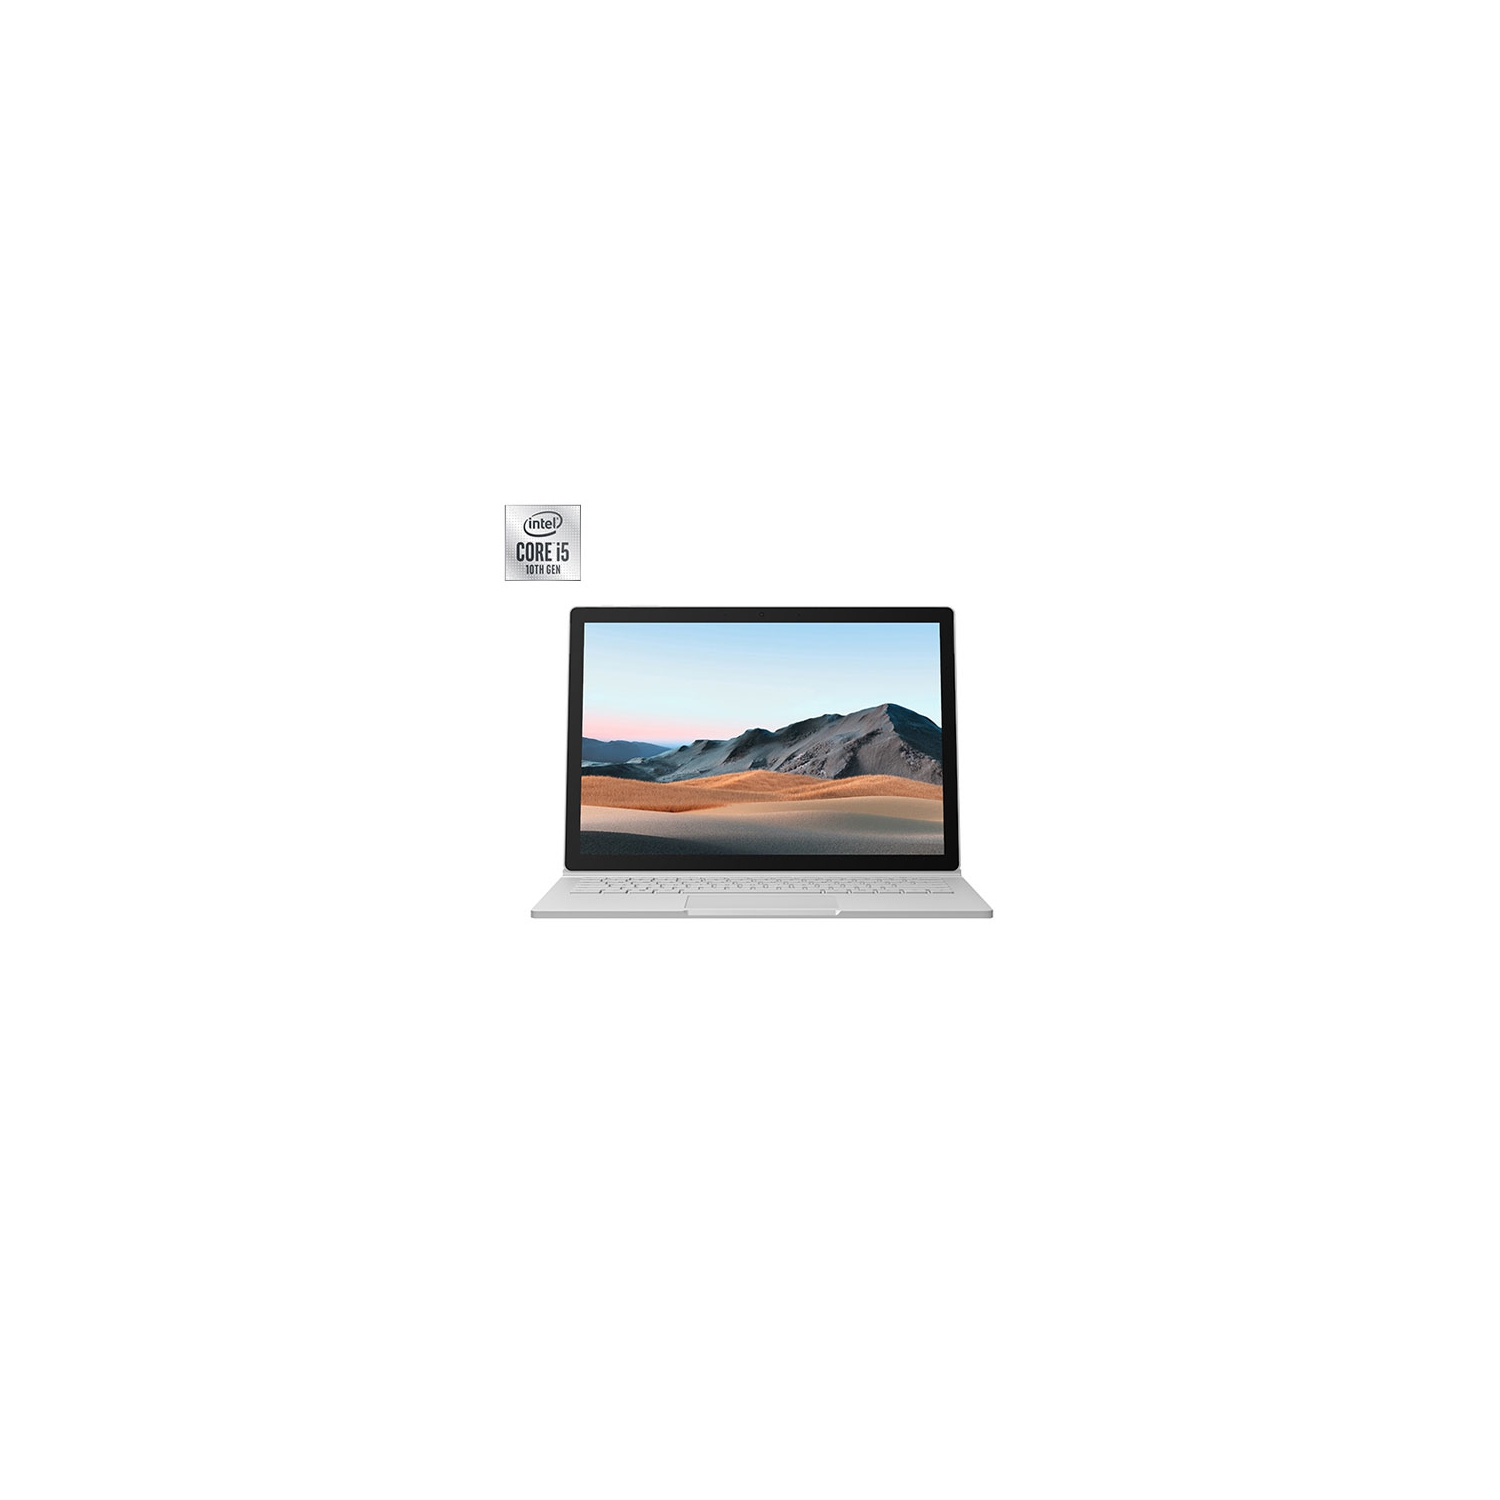 Refurbished (Excellent) - Microsoft Surface Book 3 13.5" 2-in-1 Laptop - Platinum (Intel Ci5-1035G7/256GB SSD/8GB RAM) - French